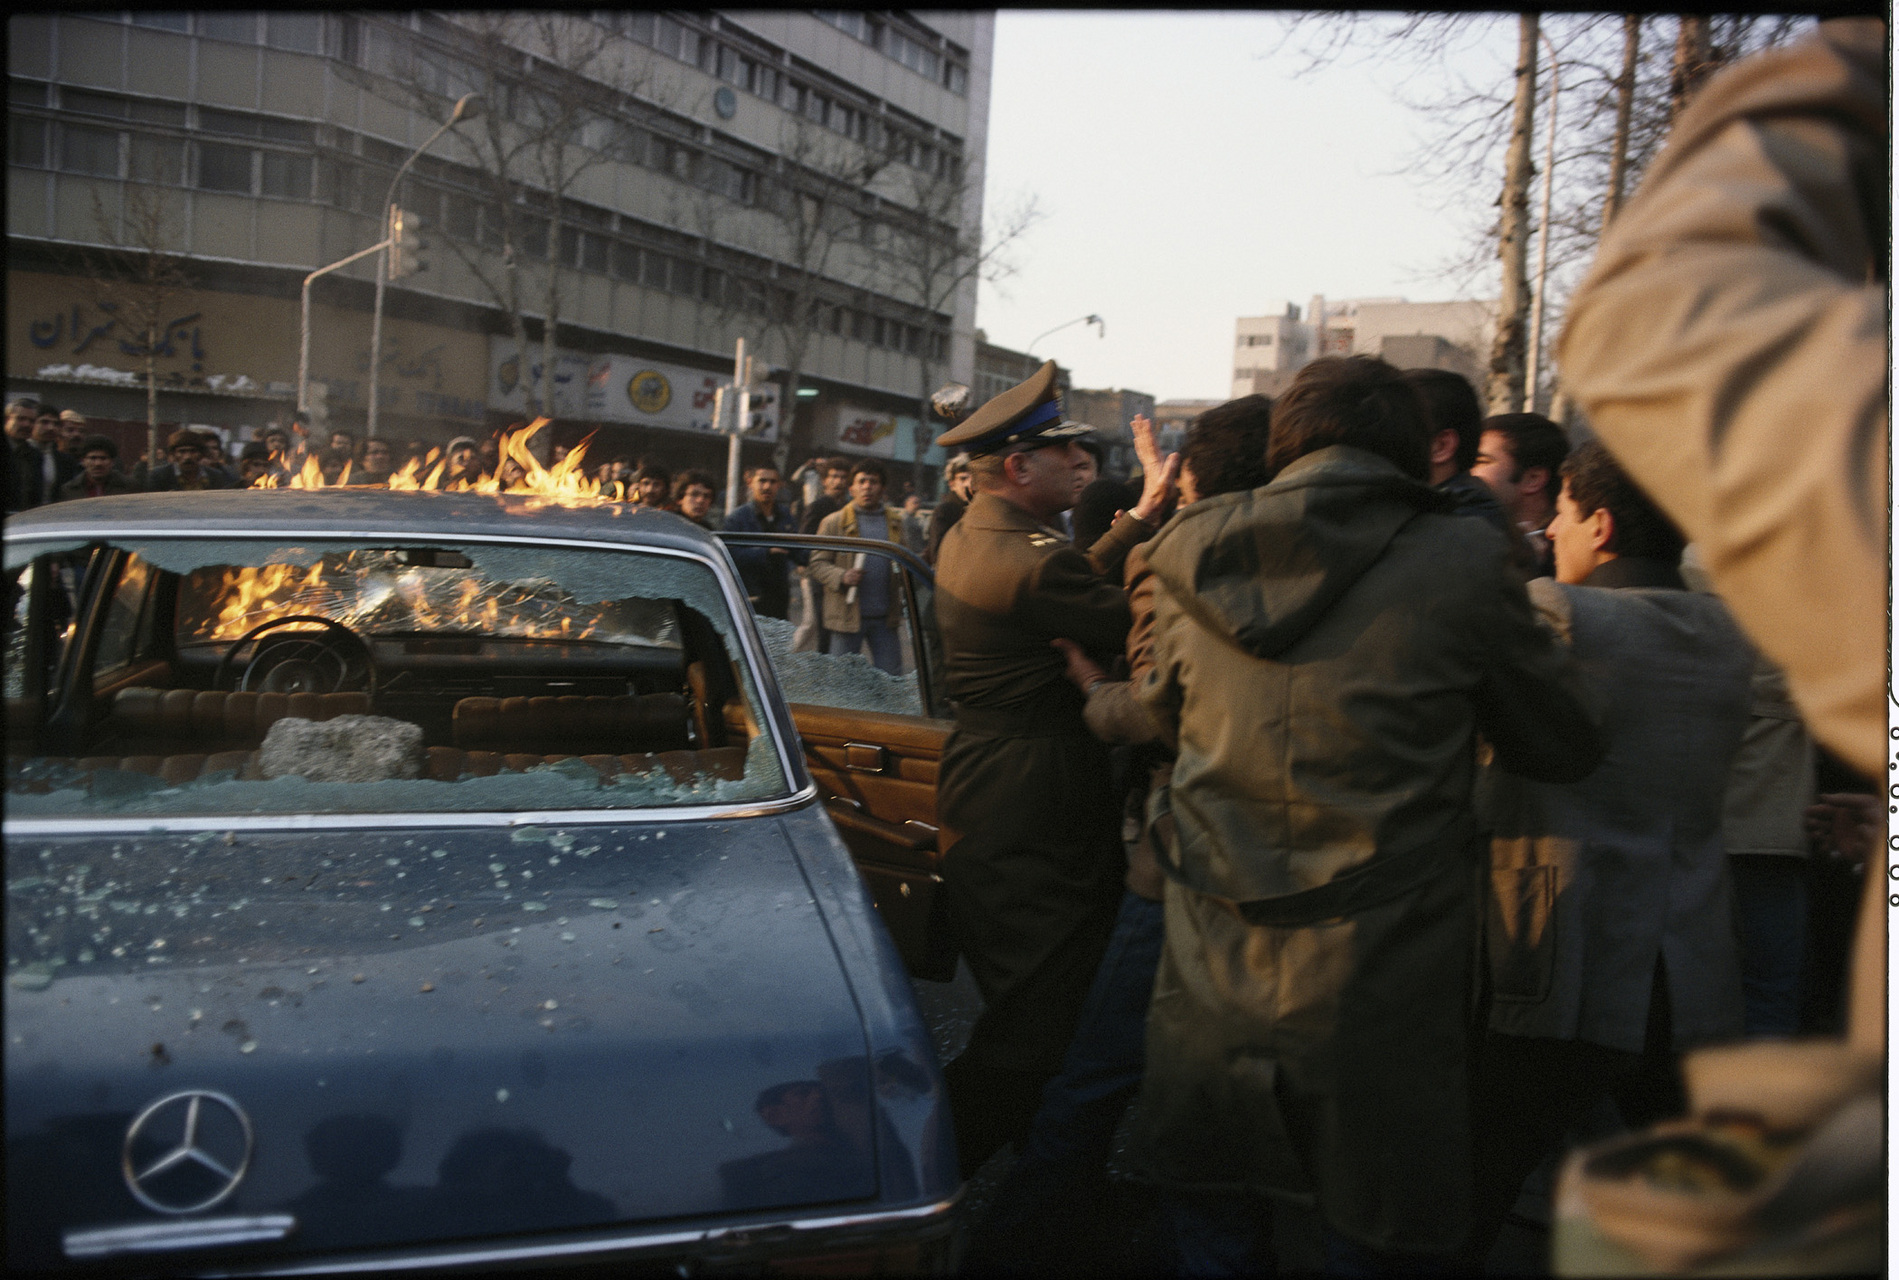 The assault and murder of Gen. Latifi, of the Iranian Army, by a mob near the University. : 44 Days: the Iranian Revolution : David Burnett | Photographer